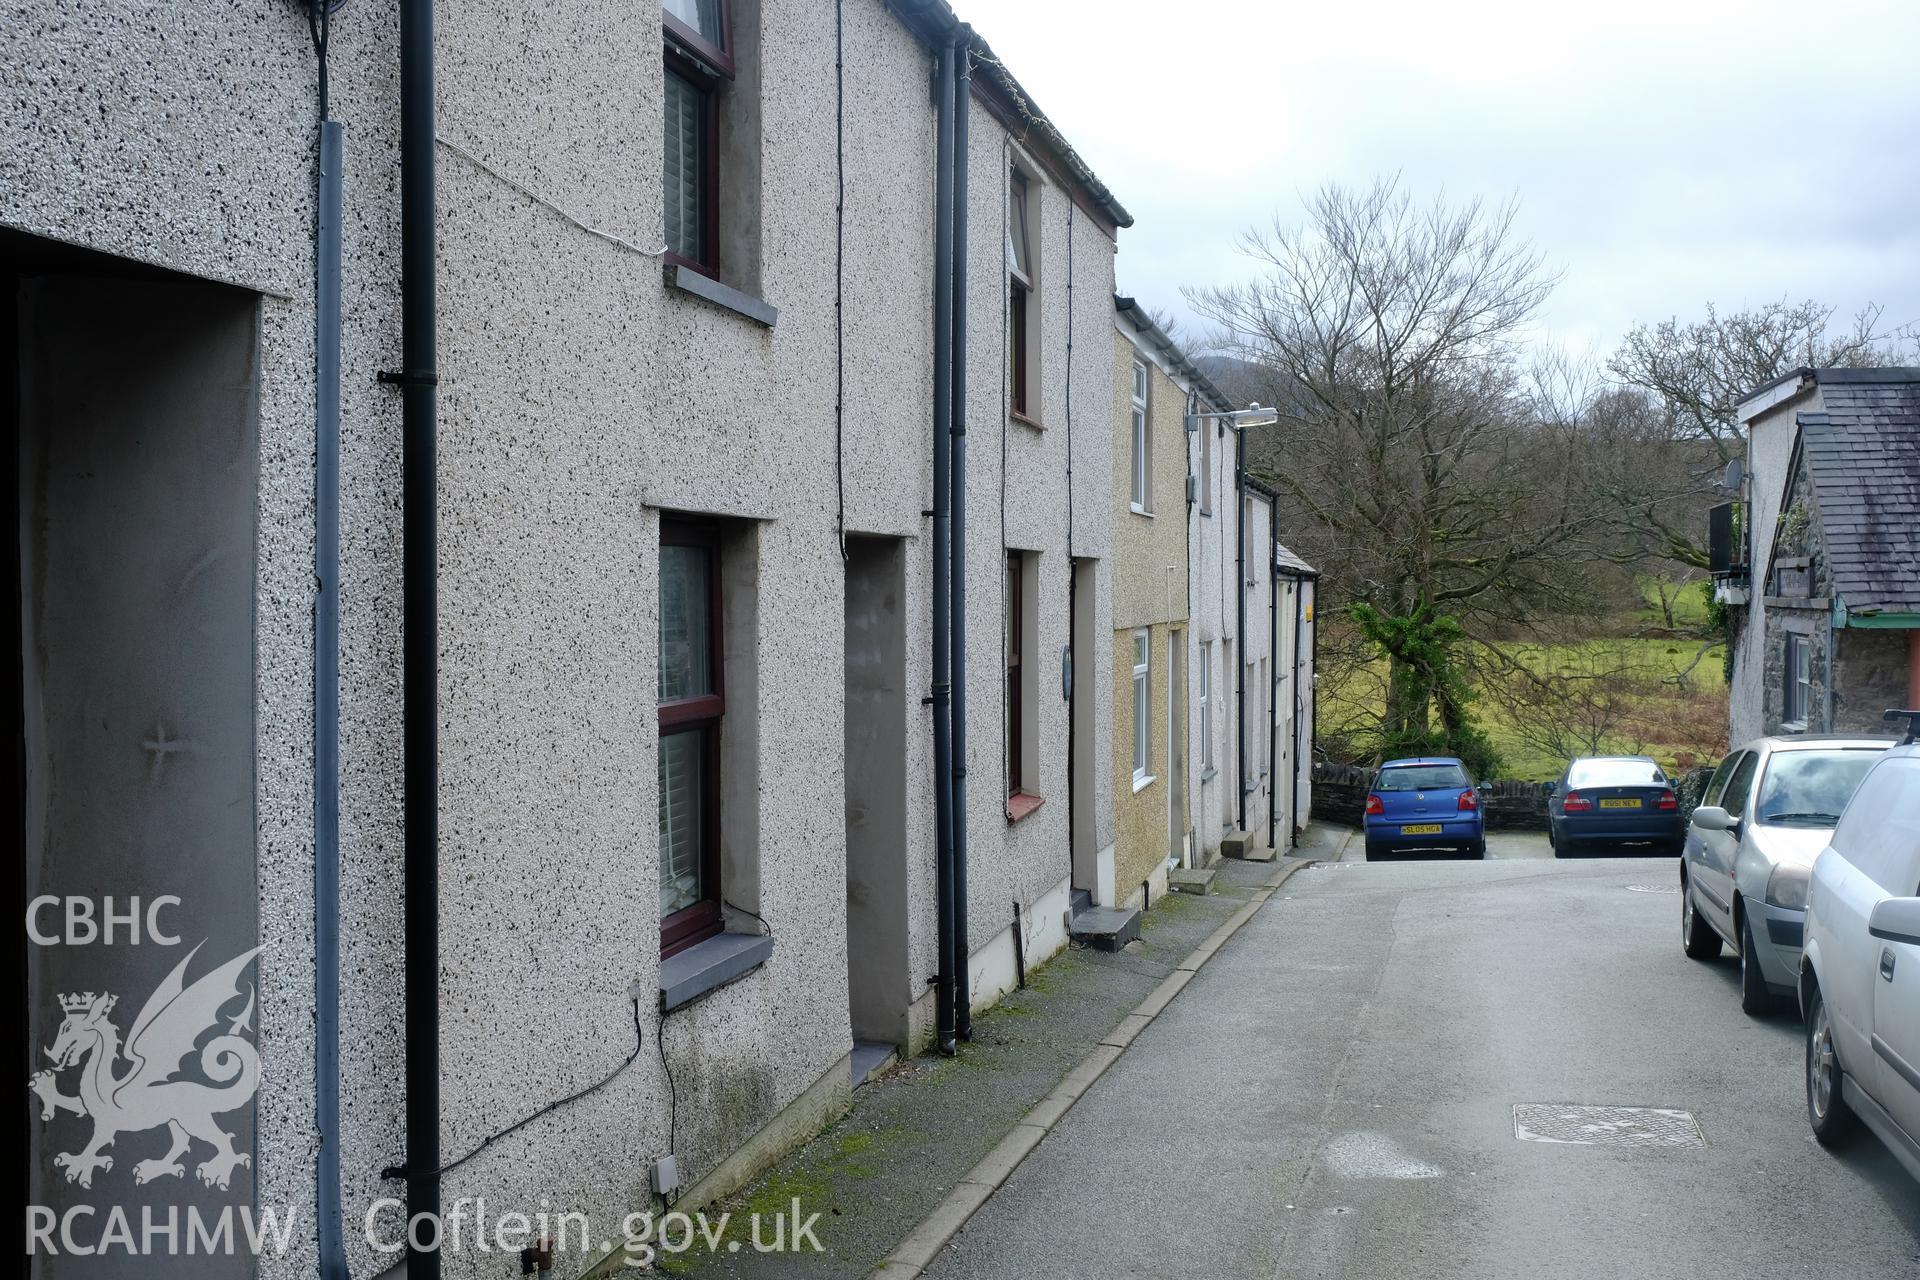 Colour photograph showing view looking south towards the river at Glanafon St, Bethesda, produced by Richard Hayman 16th March 2017